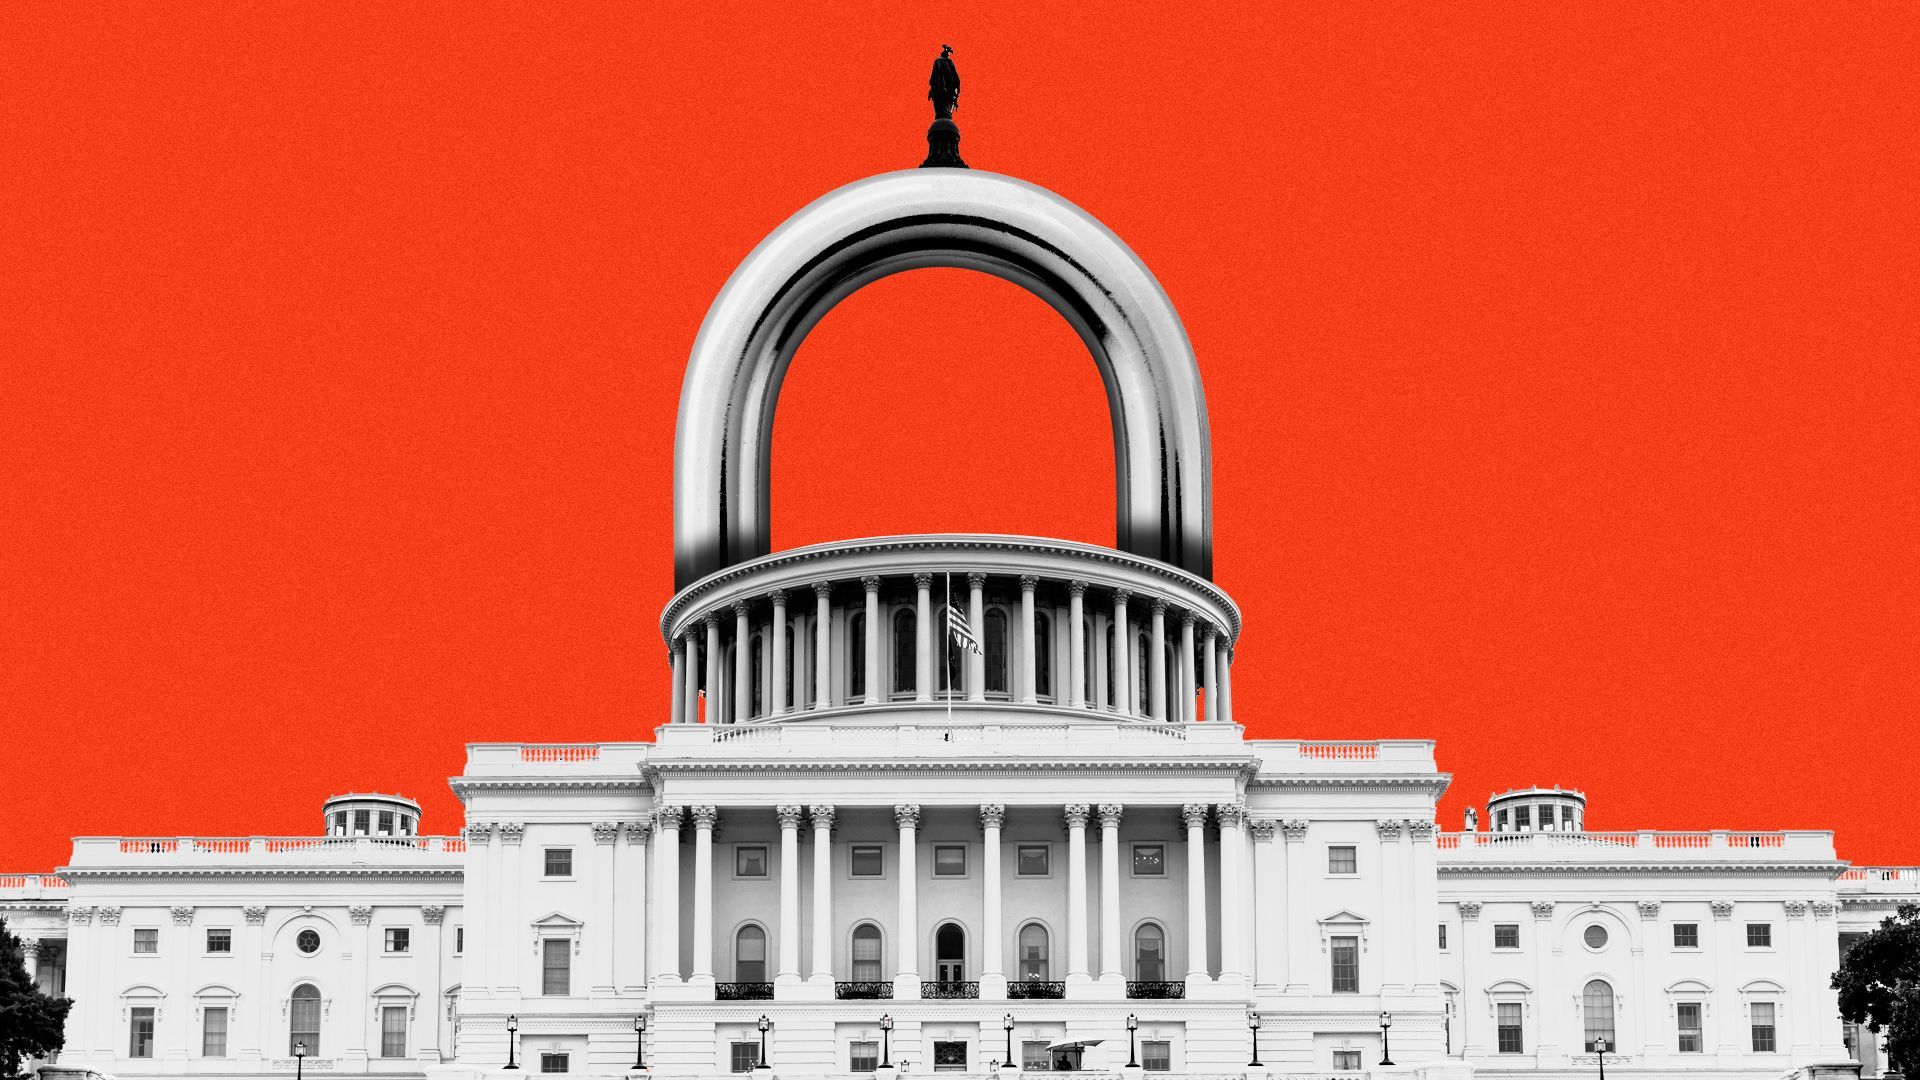 Illustration of the Capitol Building with a closed lock in place of the dome